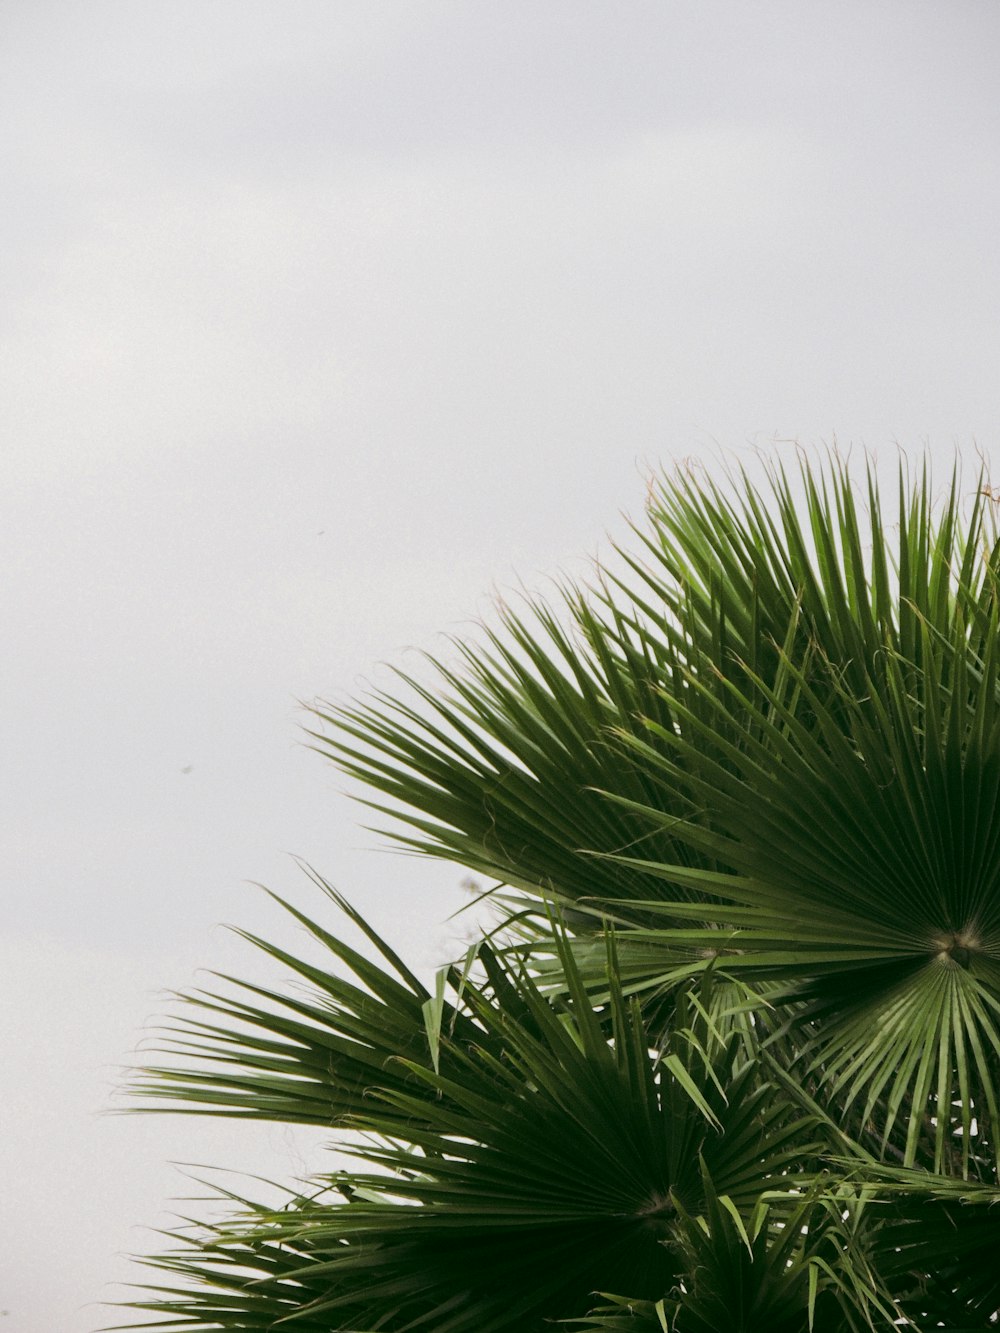 an airplane is flying over a palm tree